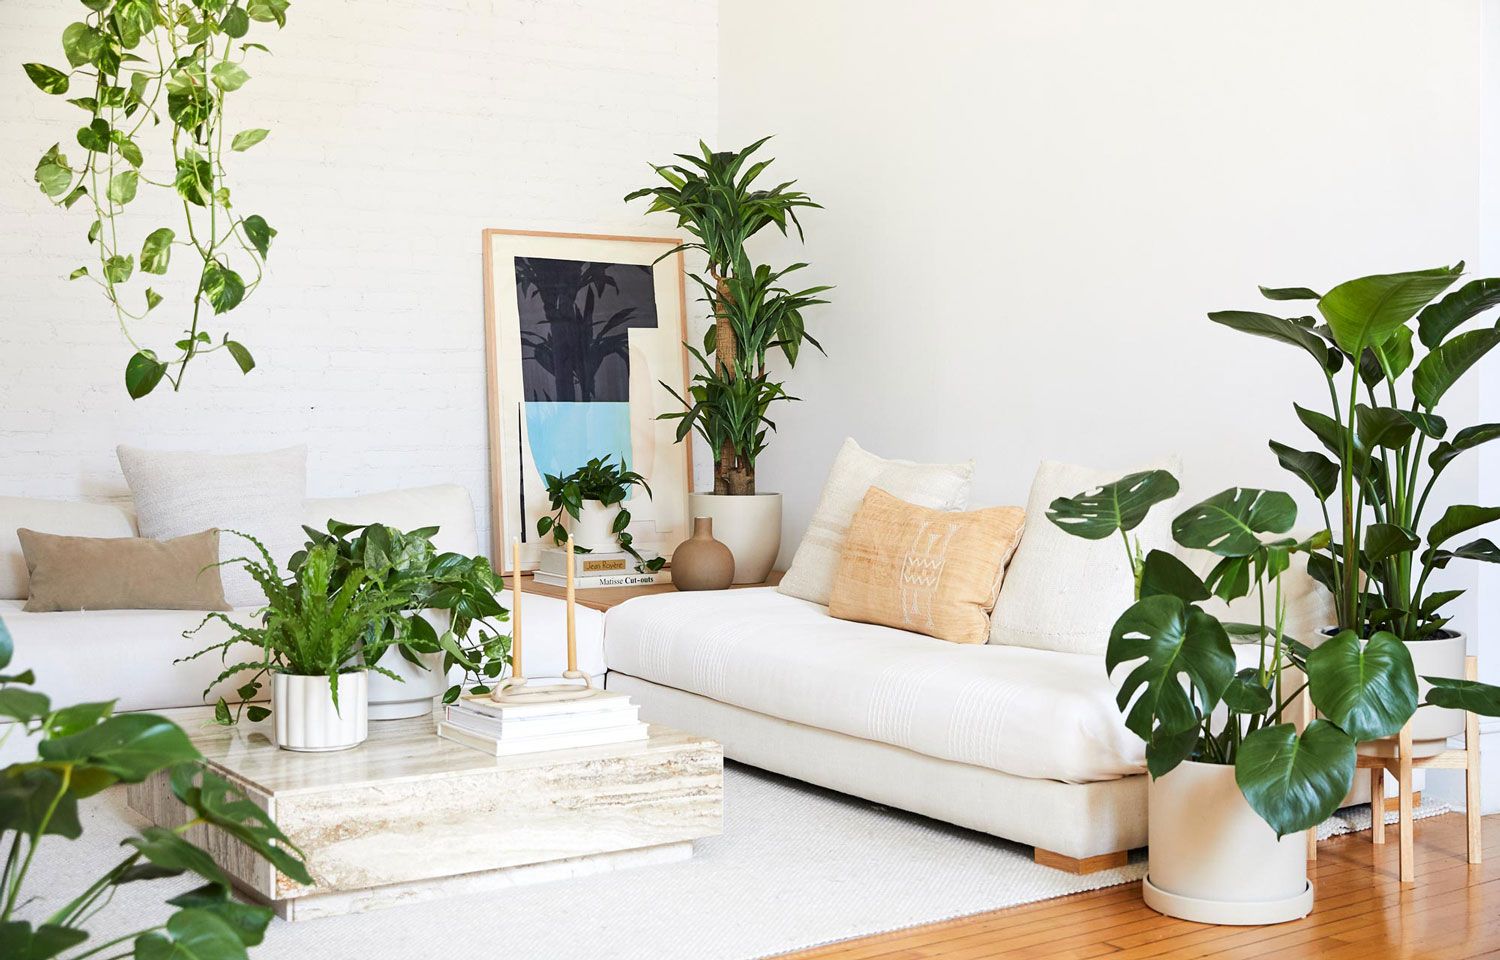 How to Style Your House Plants with Moss - J. Cathell